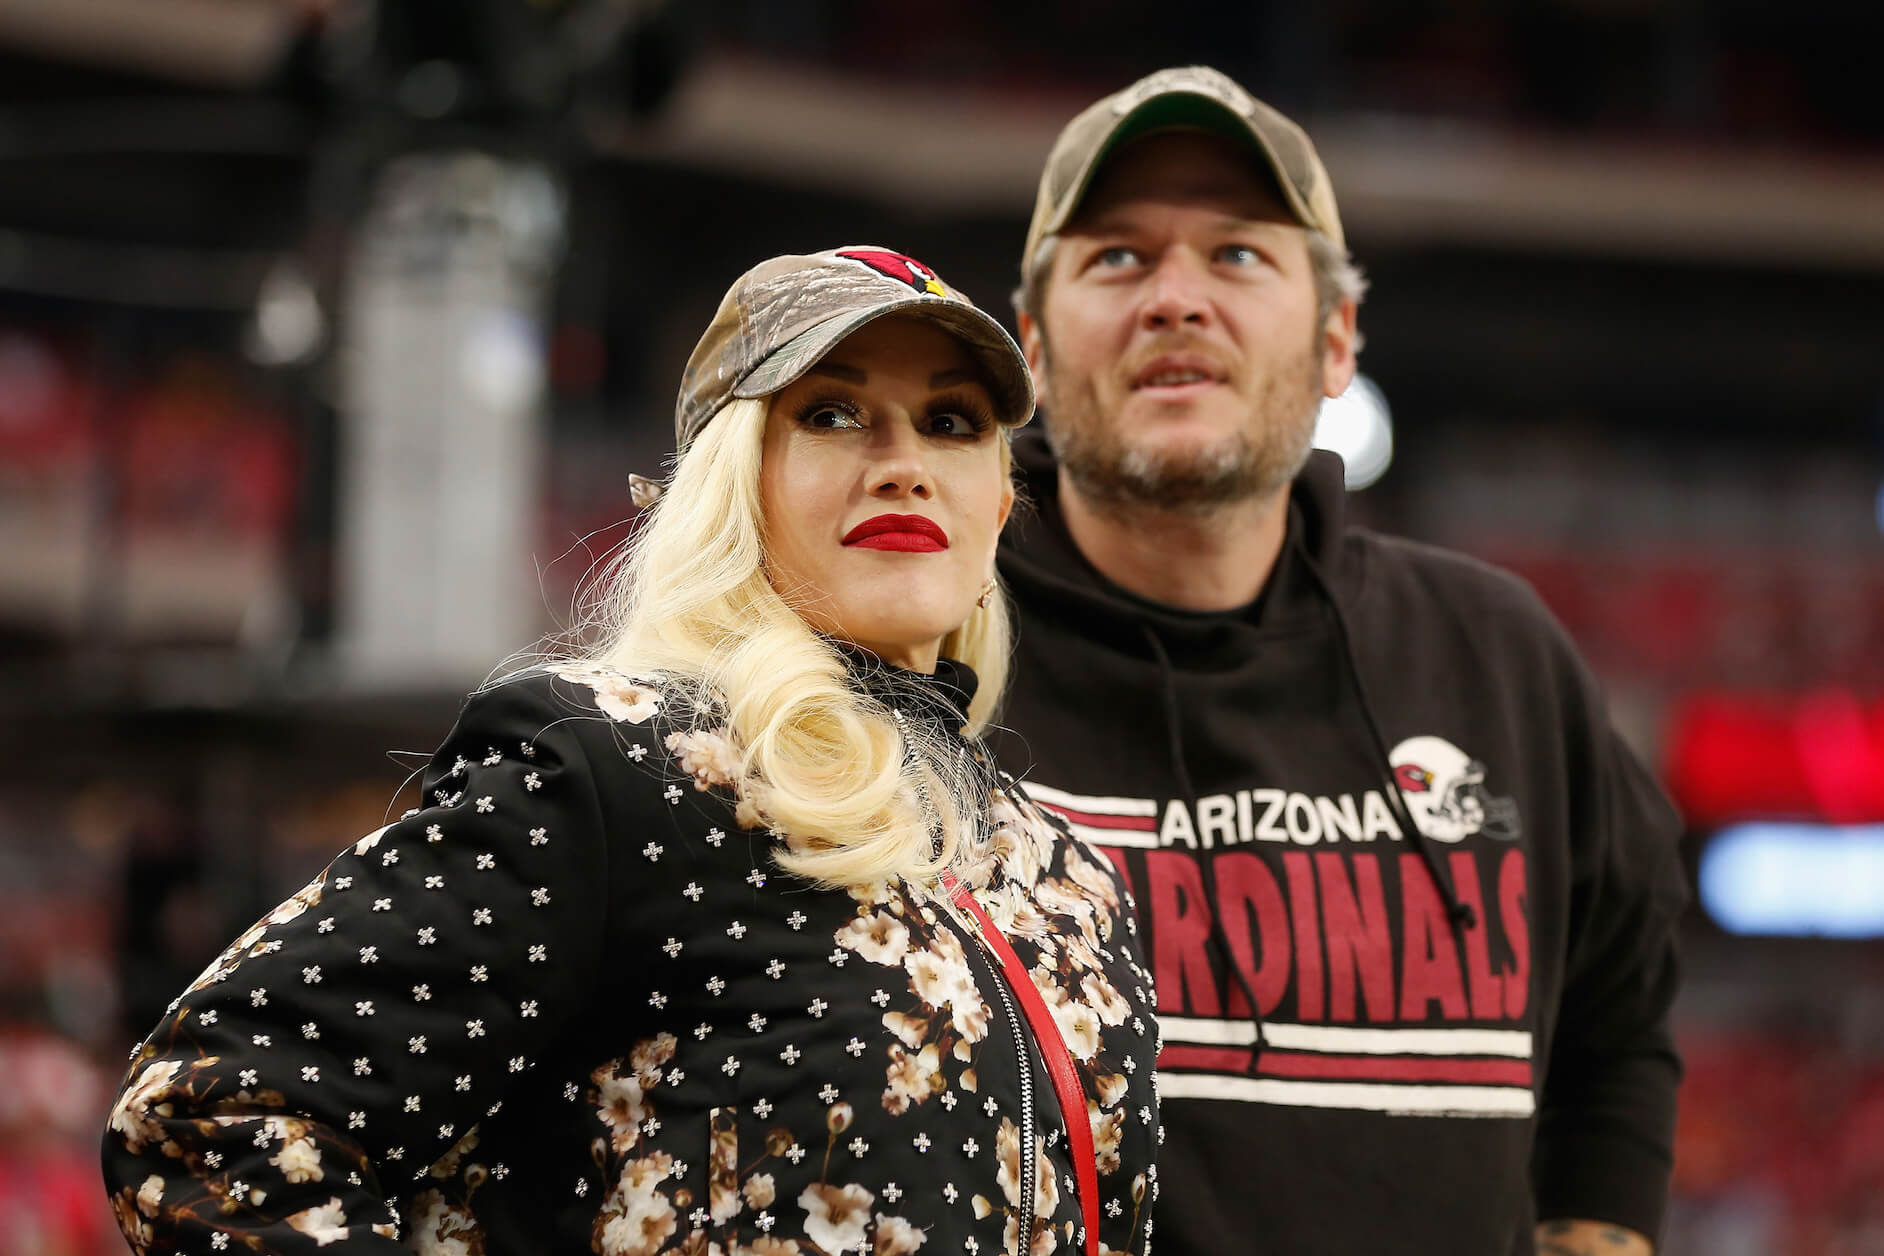 Blake Shelton wearing a Cardinals jersey and standing behind Gwen Stefani as they attend the NFL game between the Green Bay Packers and Arizona Cardinals